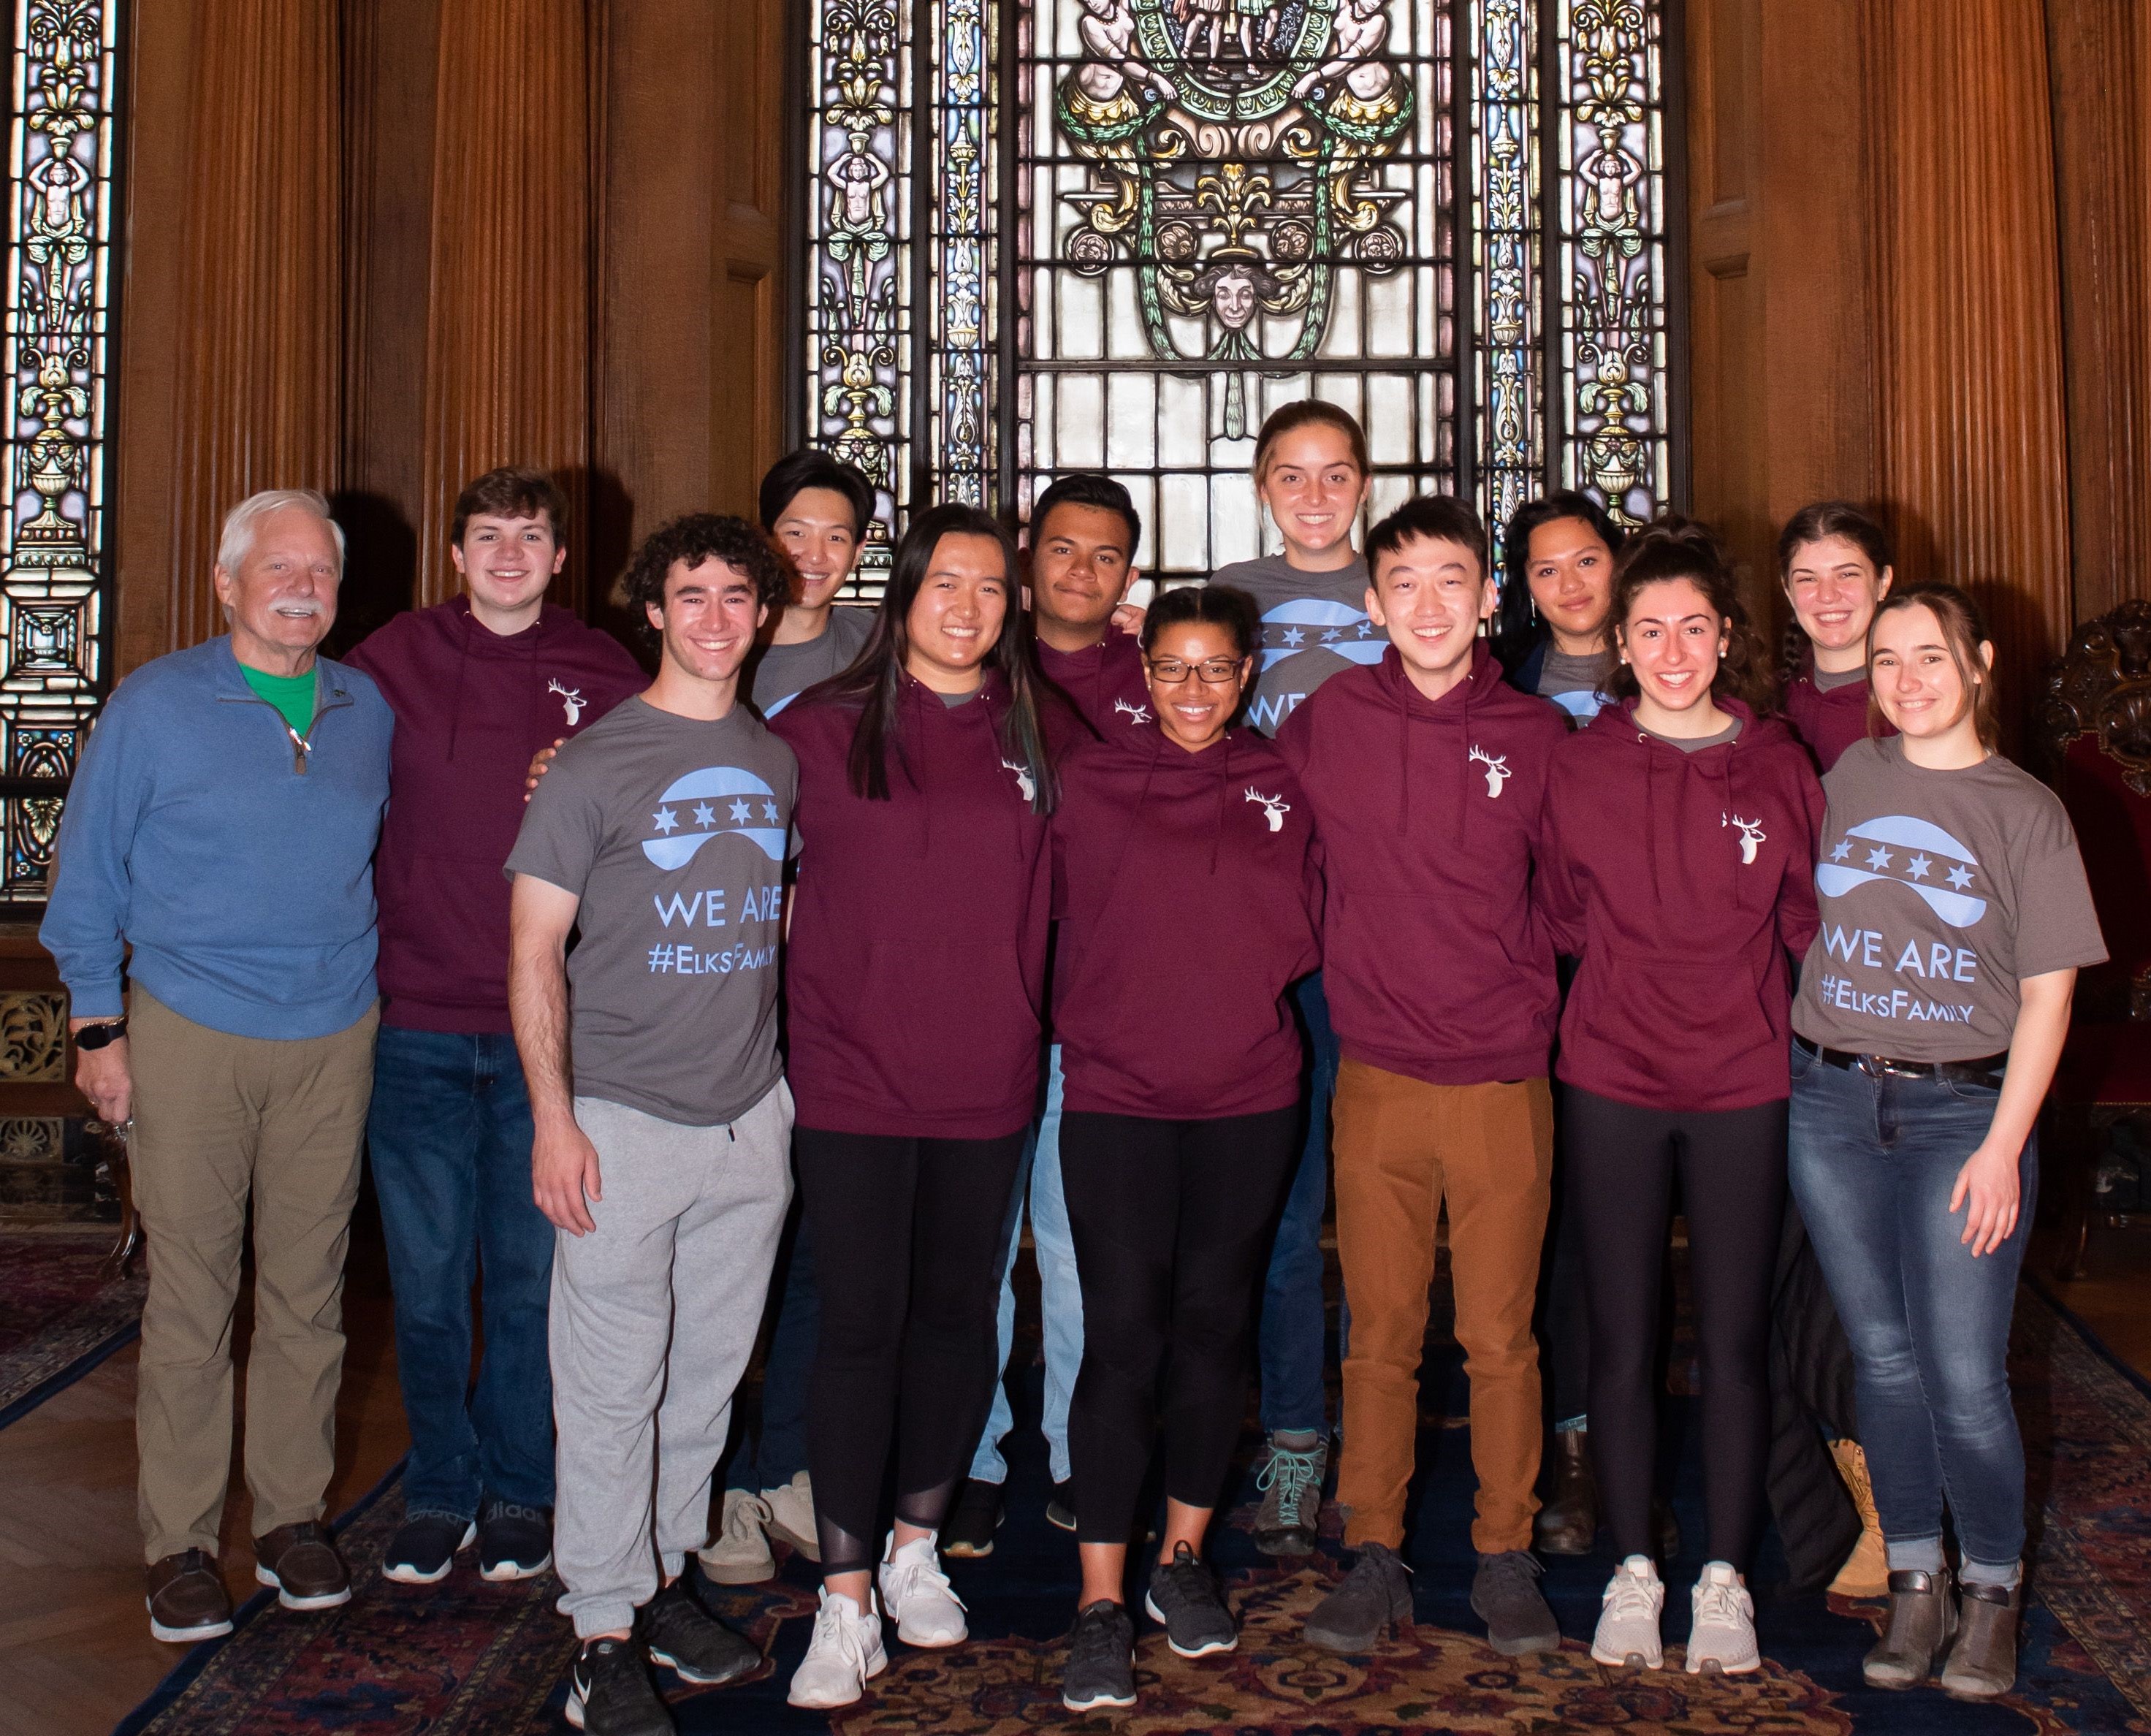 a group of Elks scholars in Elks scholar sweatshirts and Chicago Service Trip t-shirts pose for a photo in front of ornate stained glass window